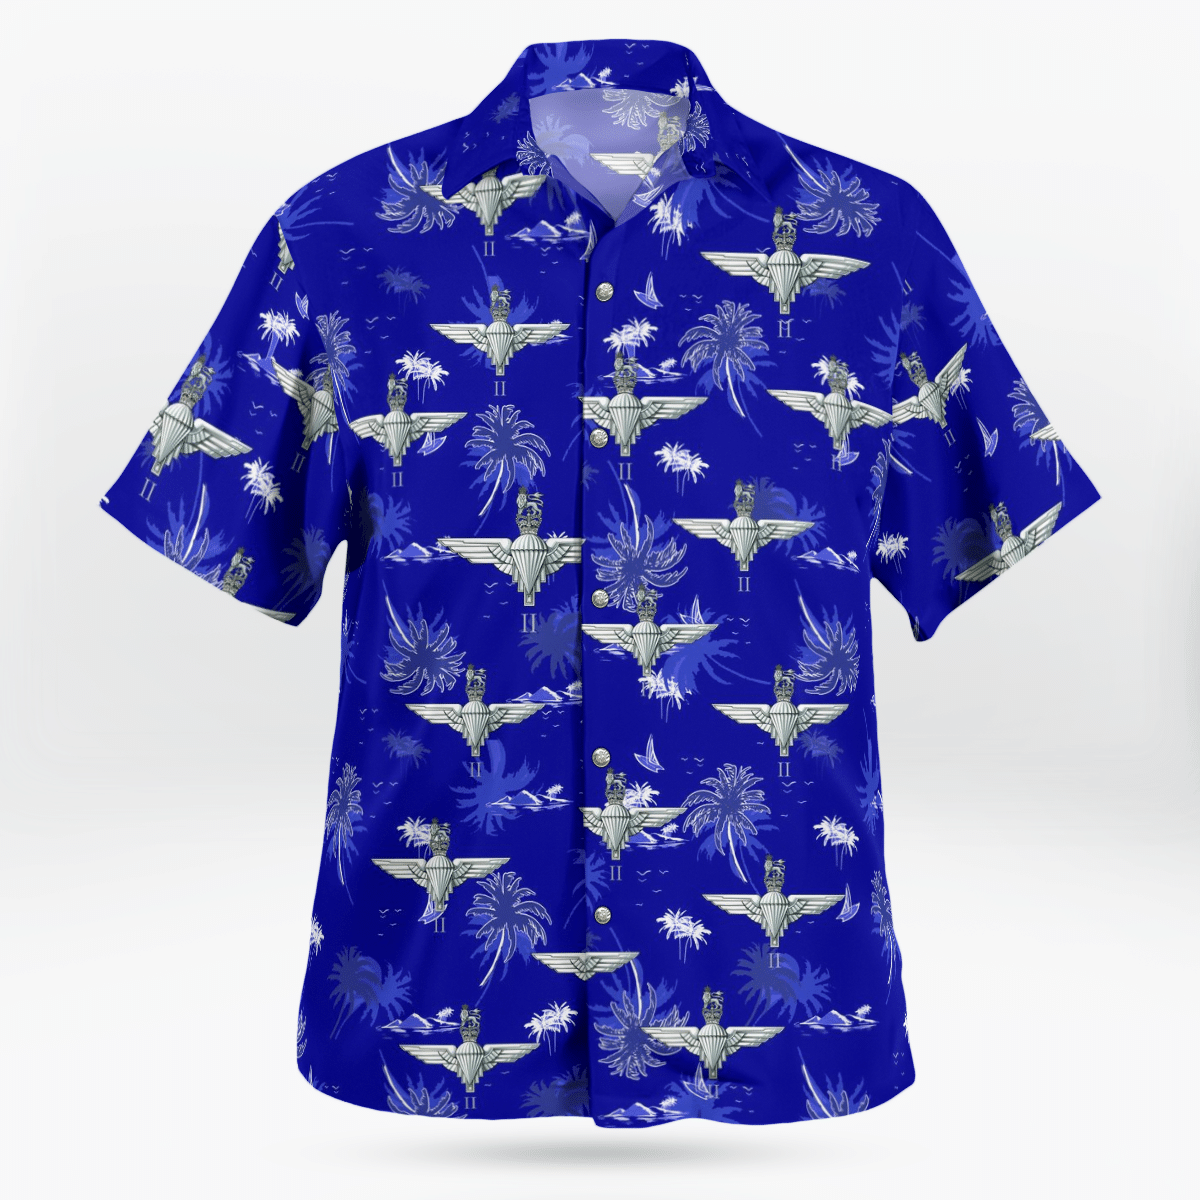 Hawaiian shirts never go out of style 238